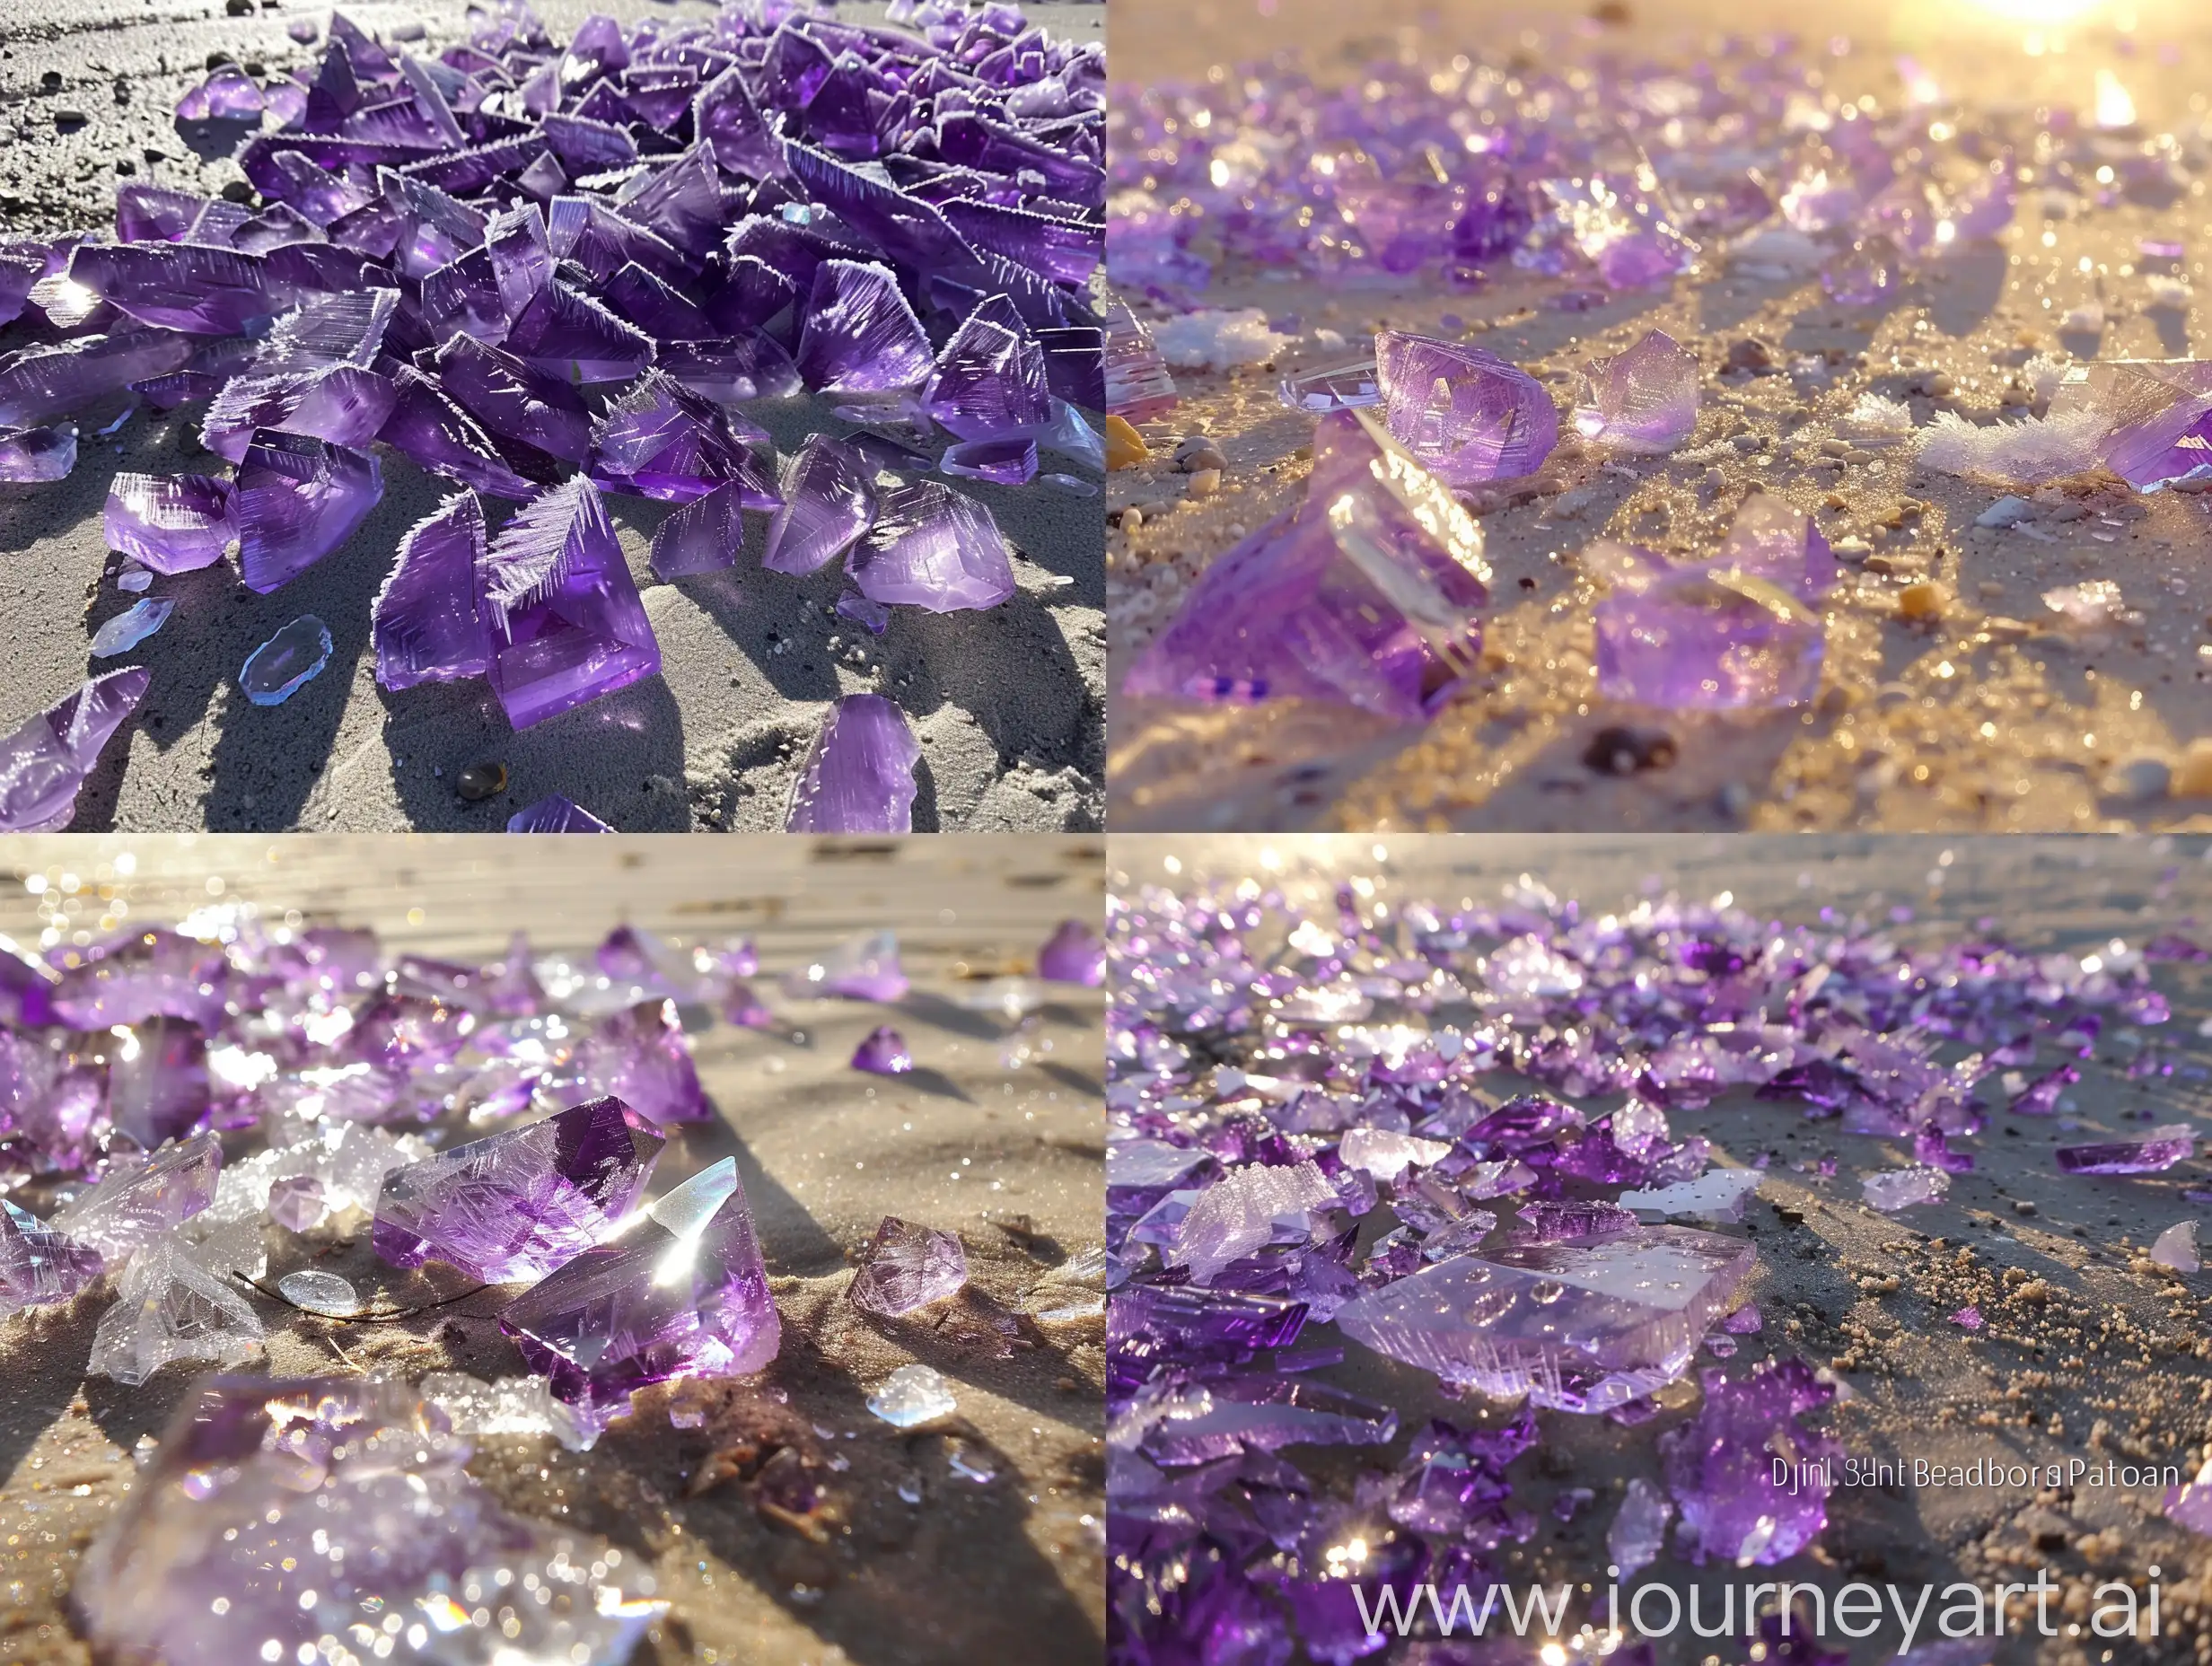 Shimmering-Amethyst-Crystals-and-Sunlit-Ice-Flakes-on-a-Serene-Sandy-Landscape